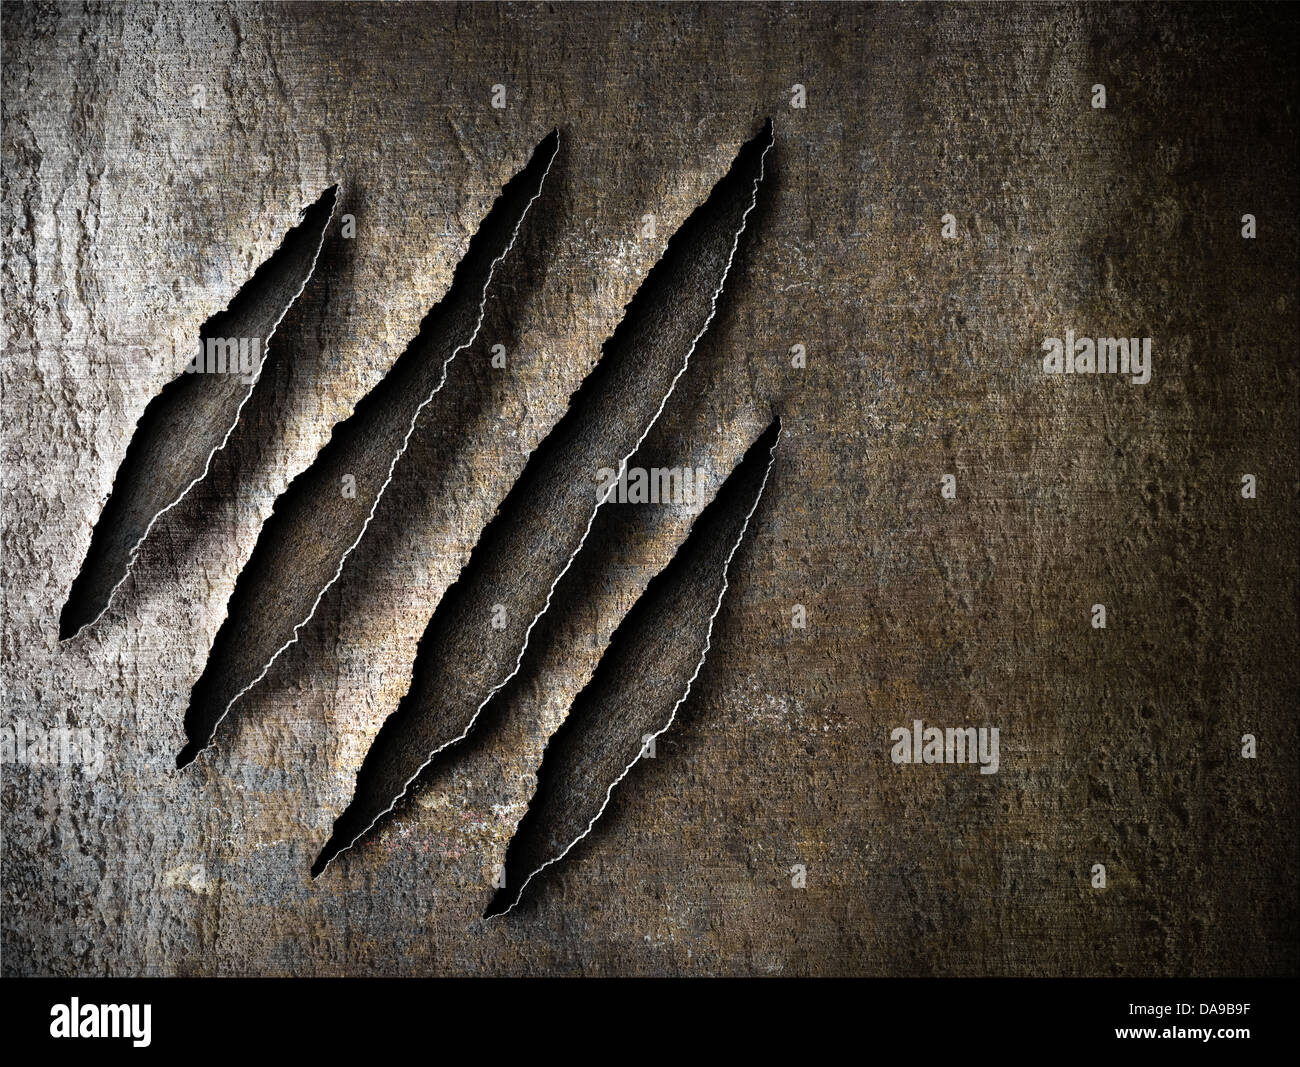 claws scratches marks on rusty metal plate Stock Photo